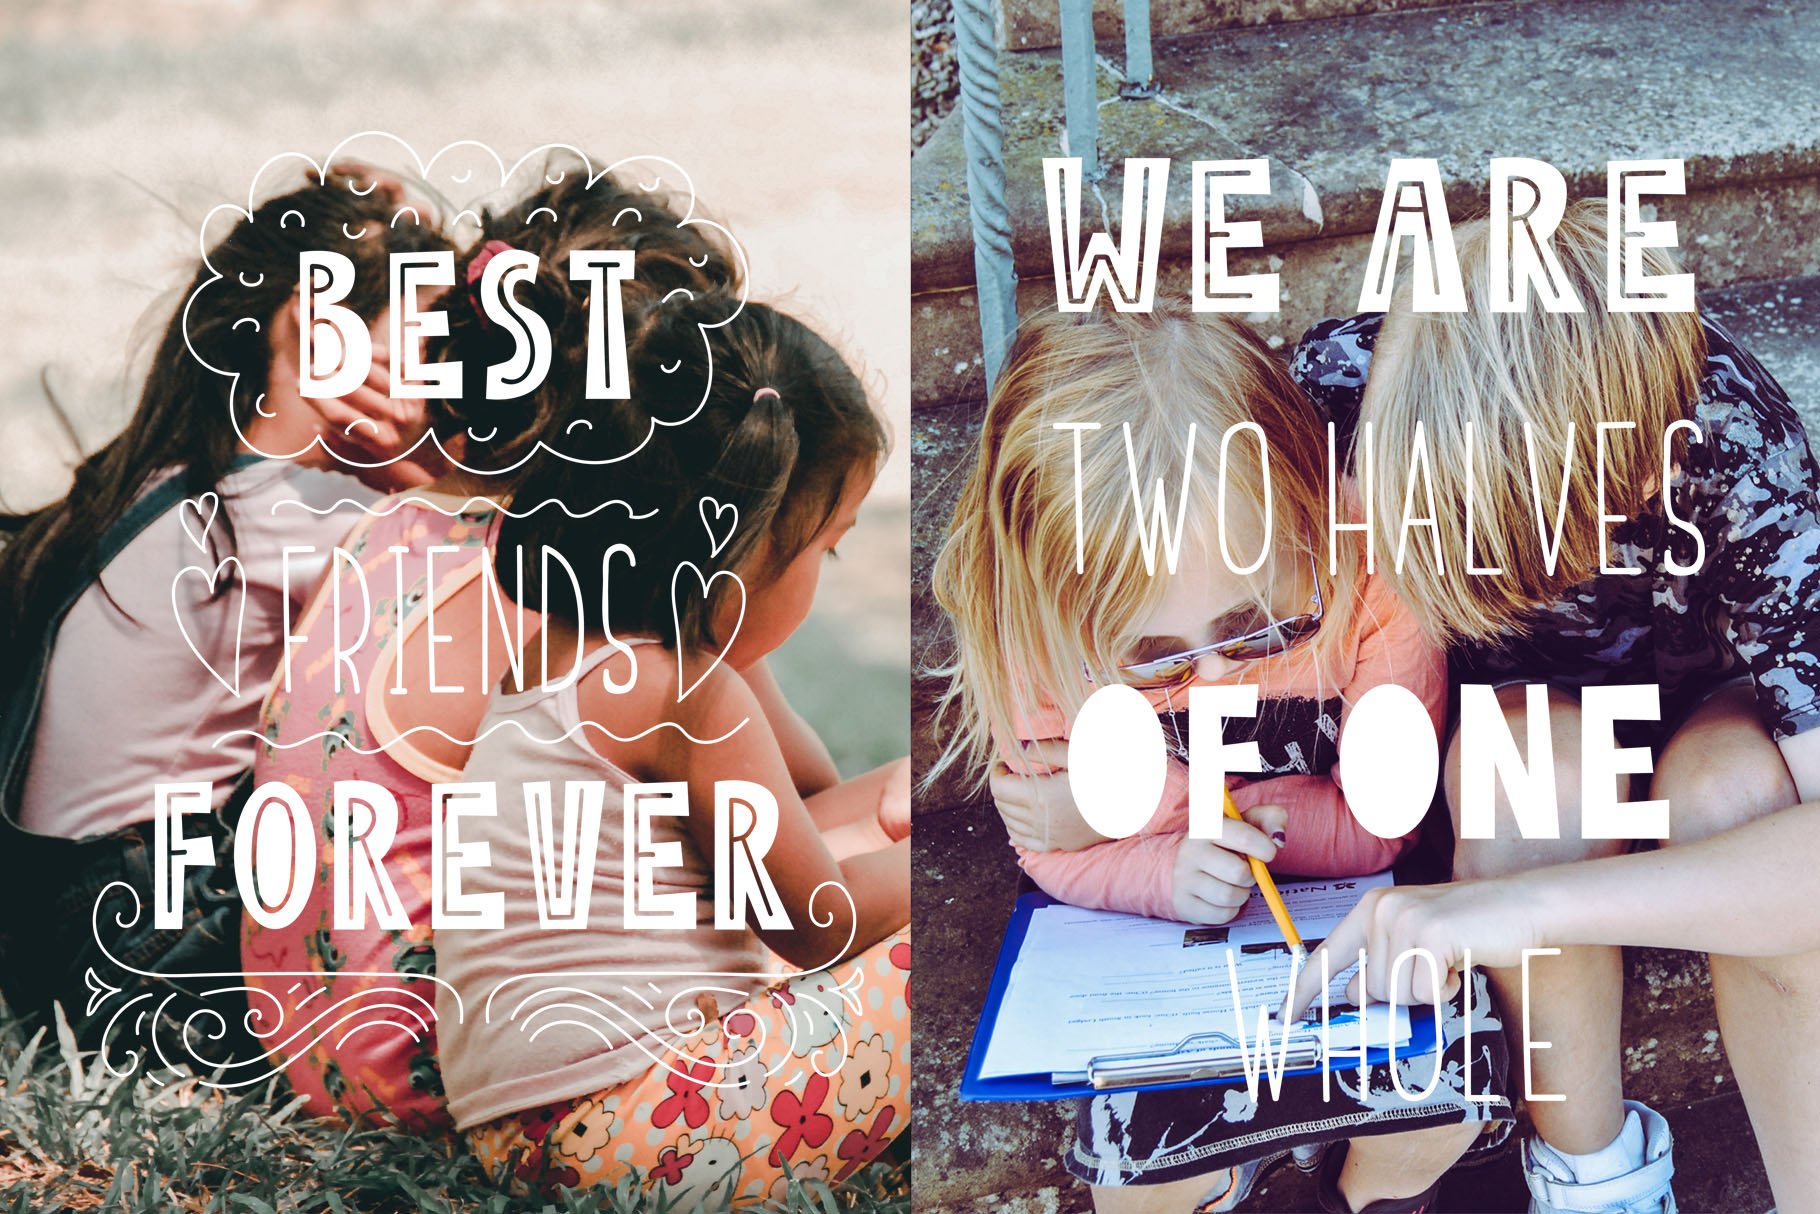 Friends Forever Font Duo